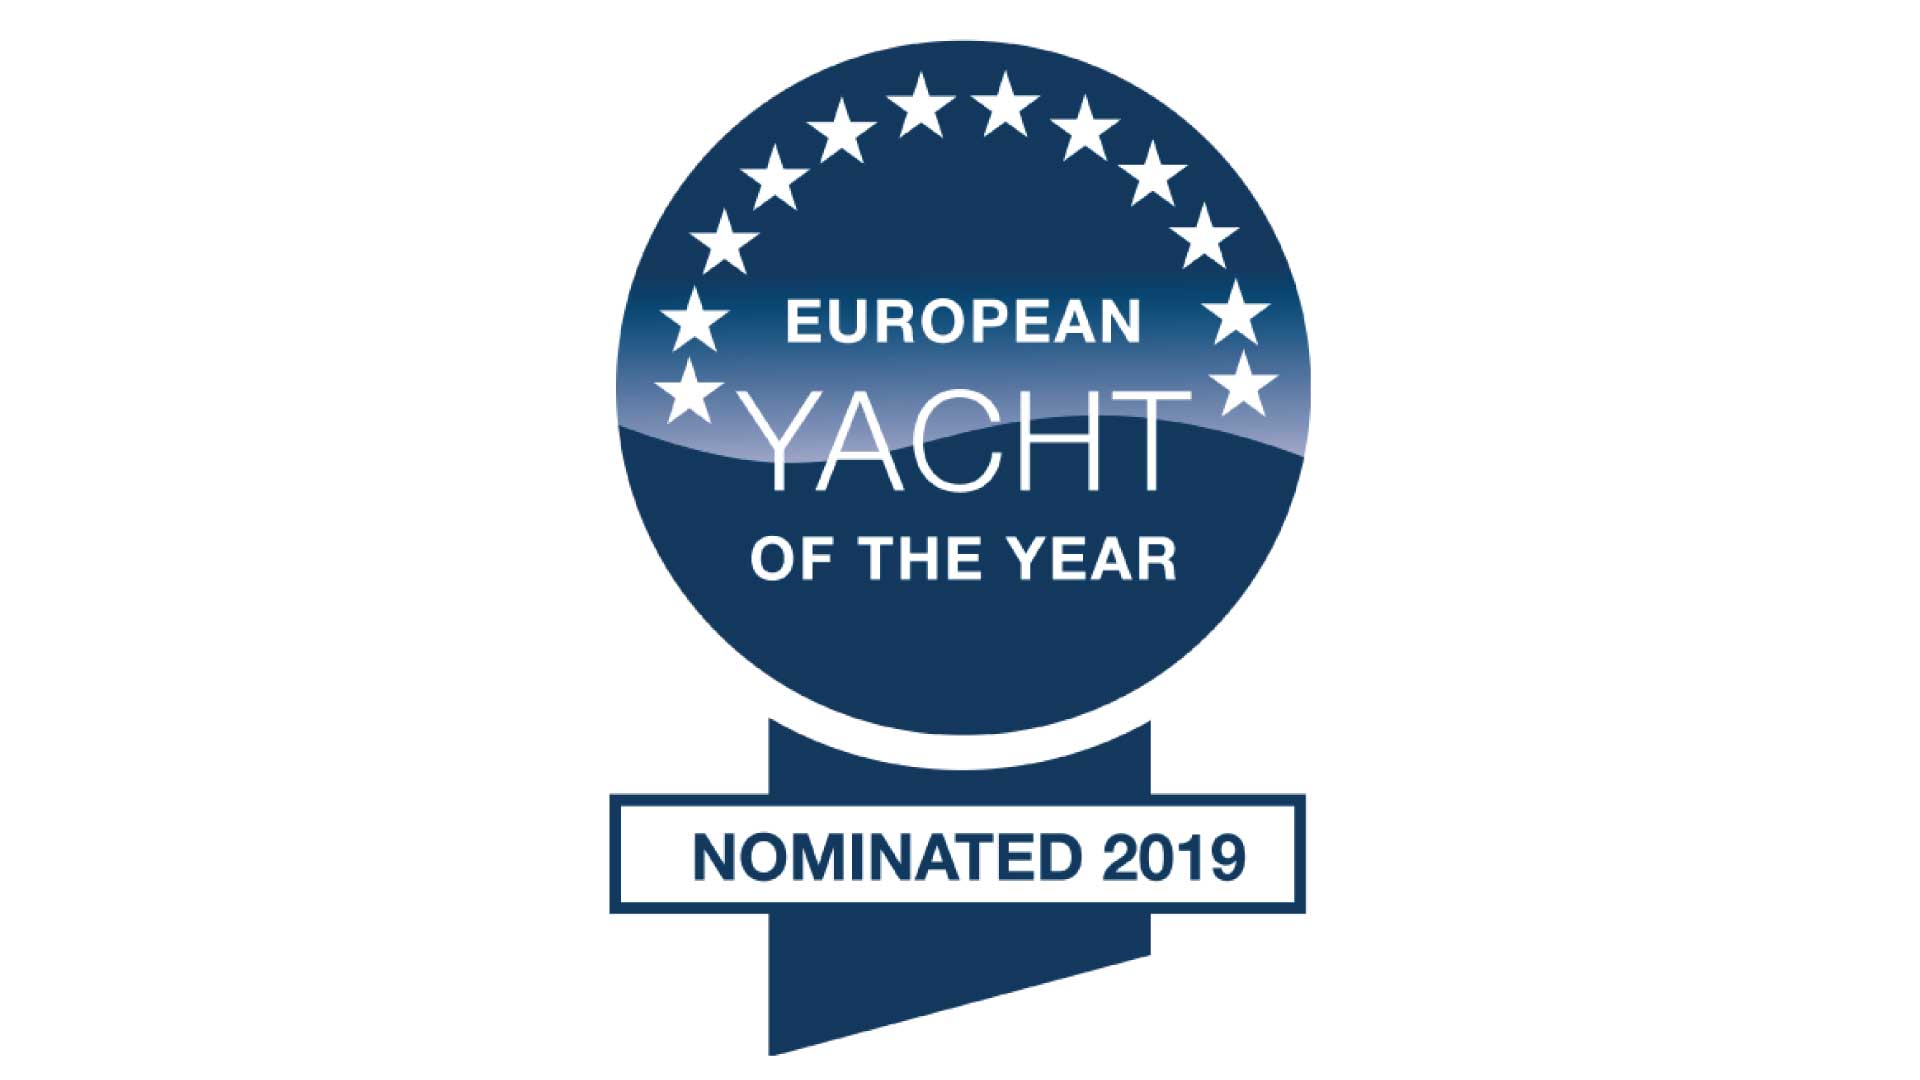 European Yacht of the Year nomination for the RS21